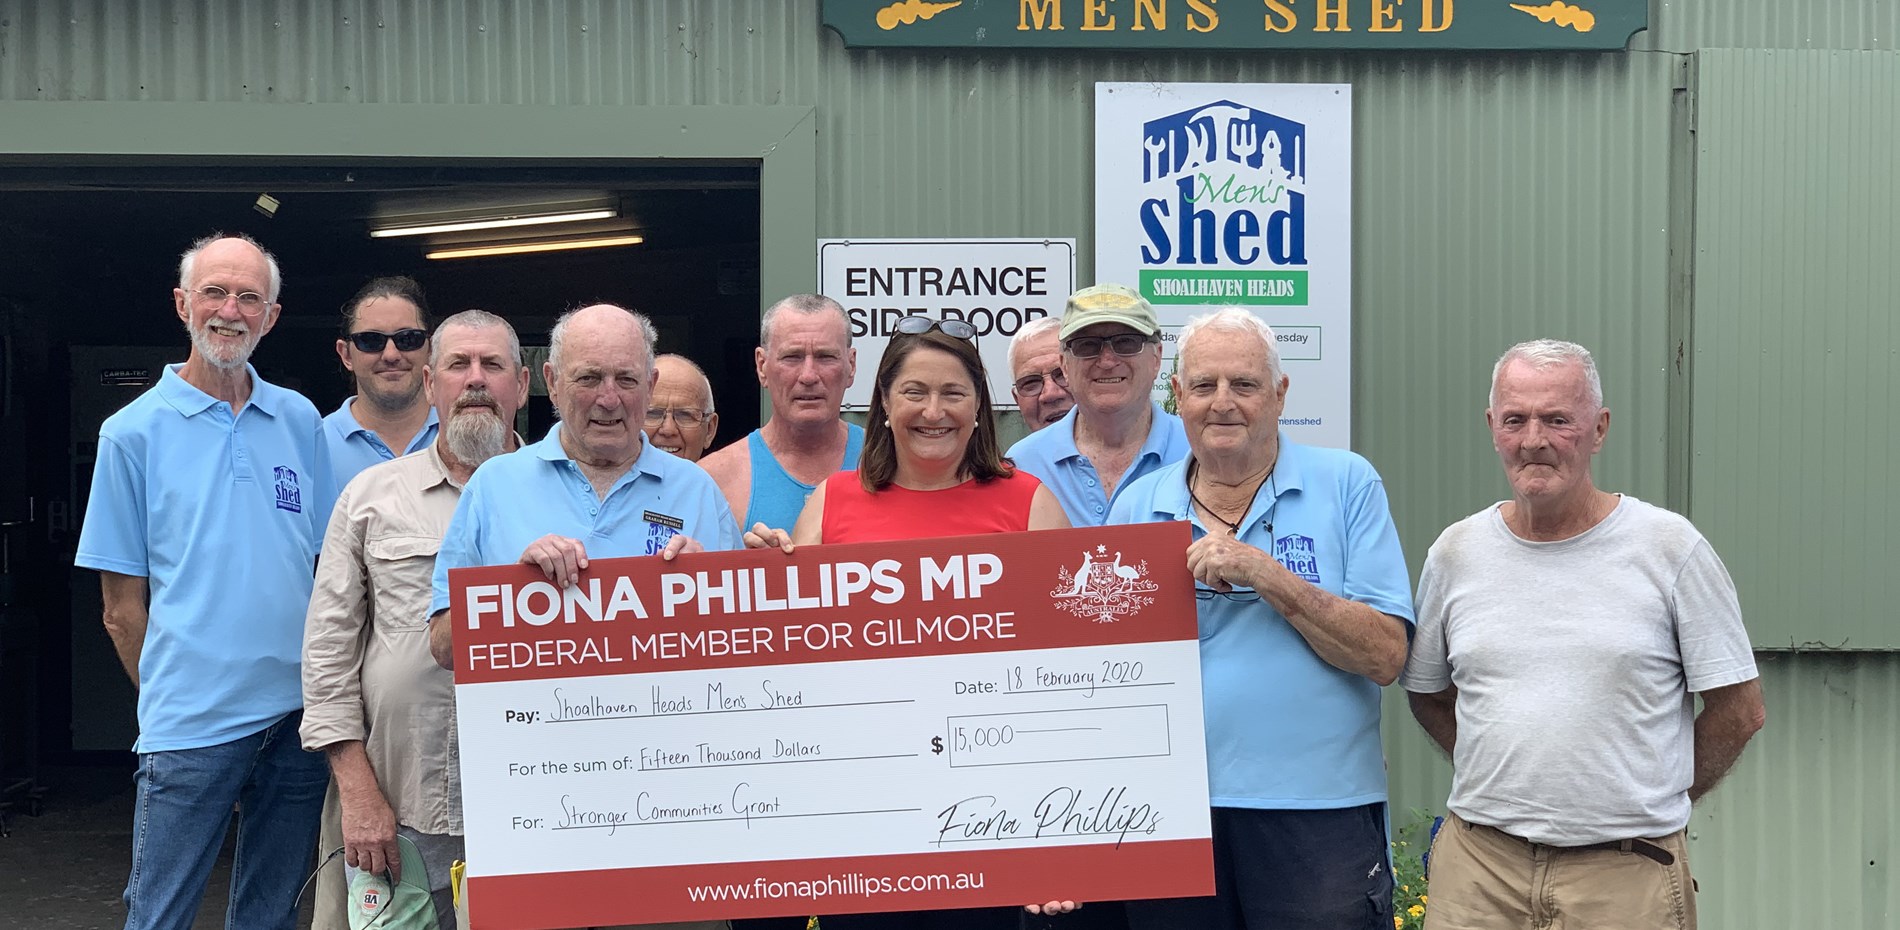 Media release: $15,000 helping hand for Shoalhaven Heads Men's Shed Main Image